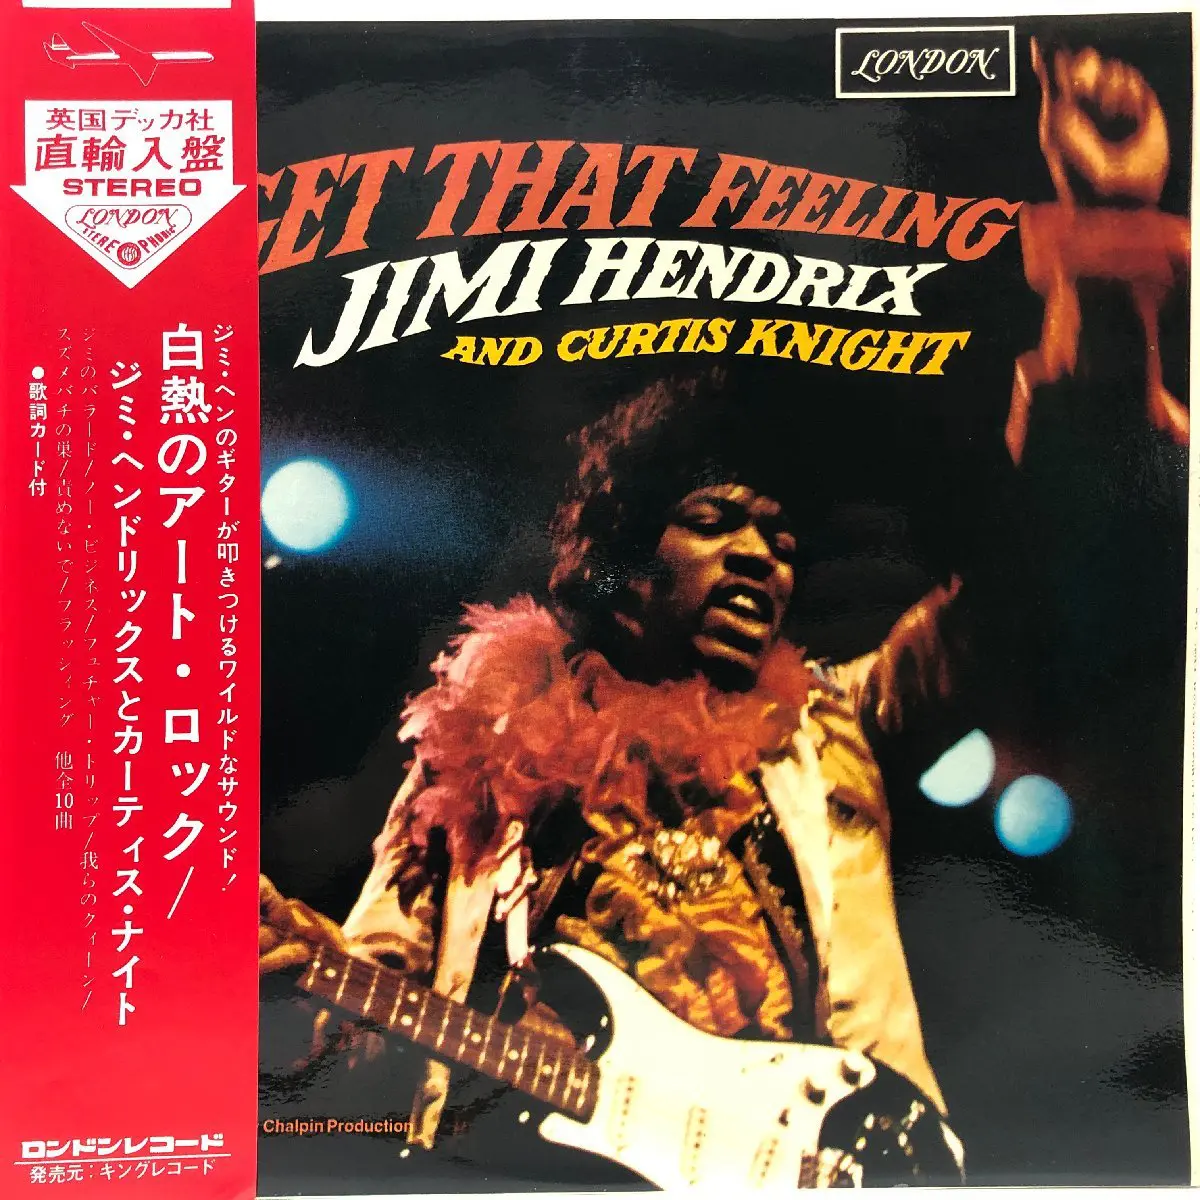 UK盤 LP】JIMI HENDRIX AND CURTIS KNIGHT / GET THAT FEELING 白熱の